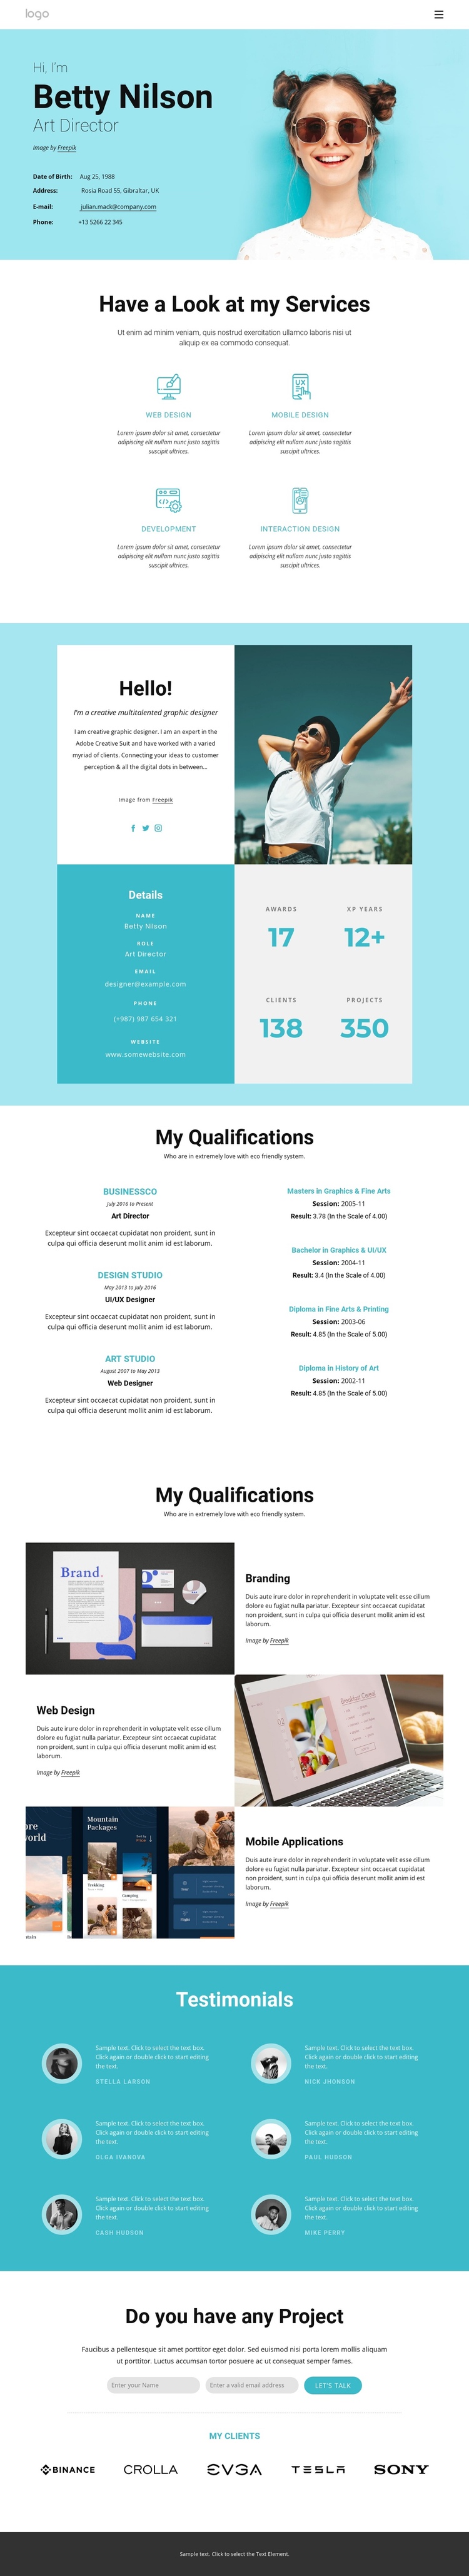 Betty Nilson personal page One Page Template